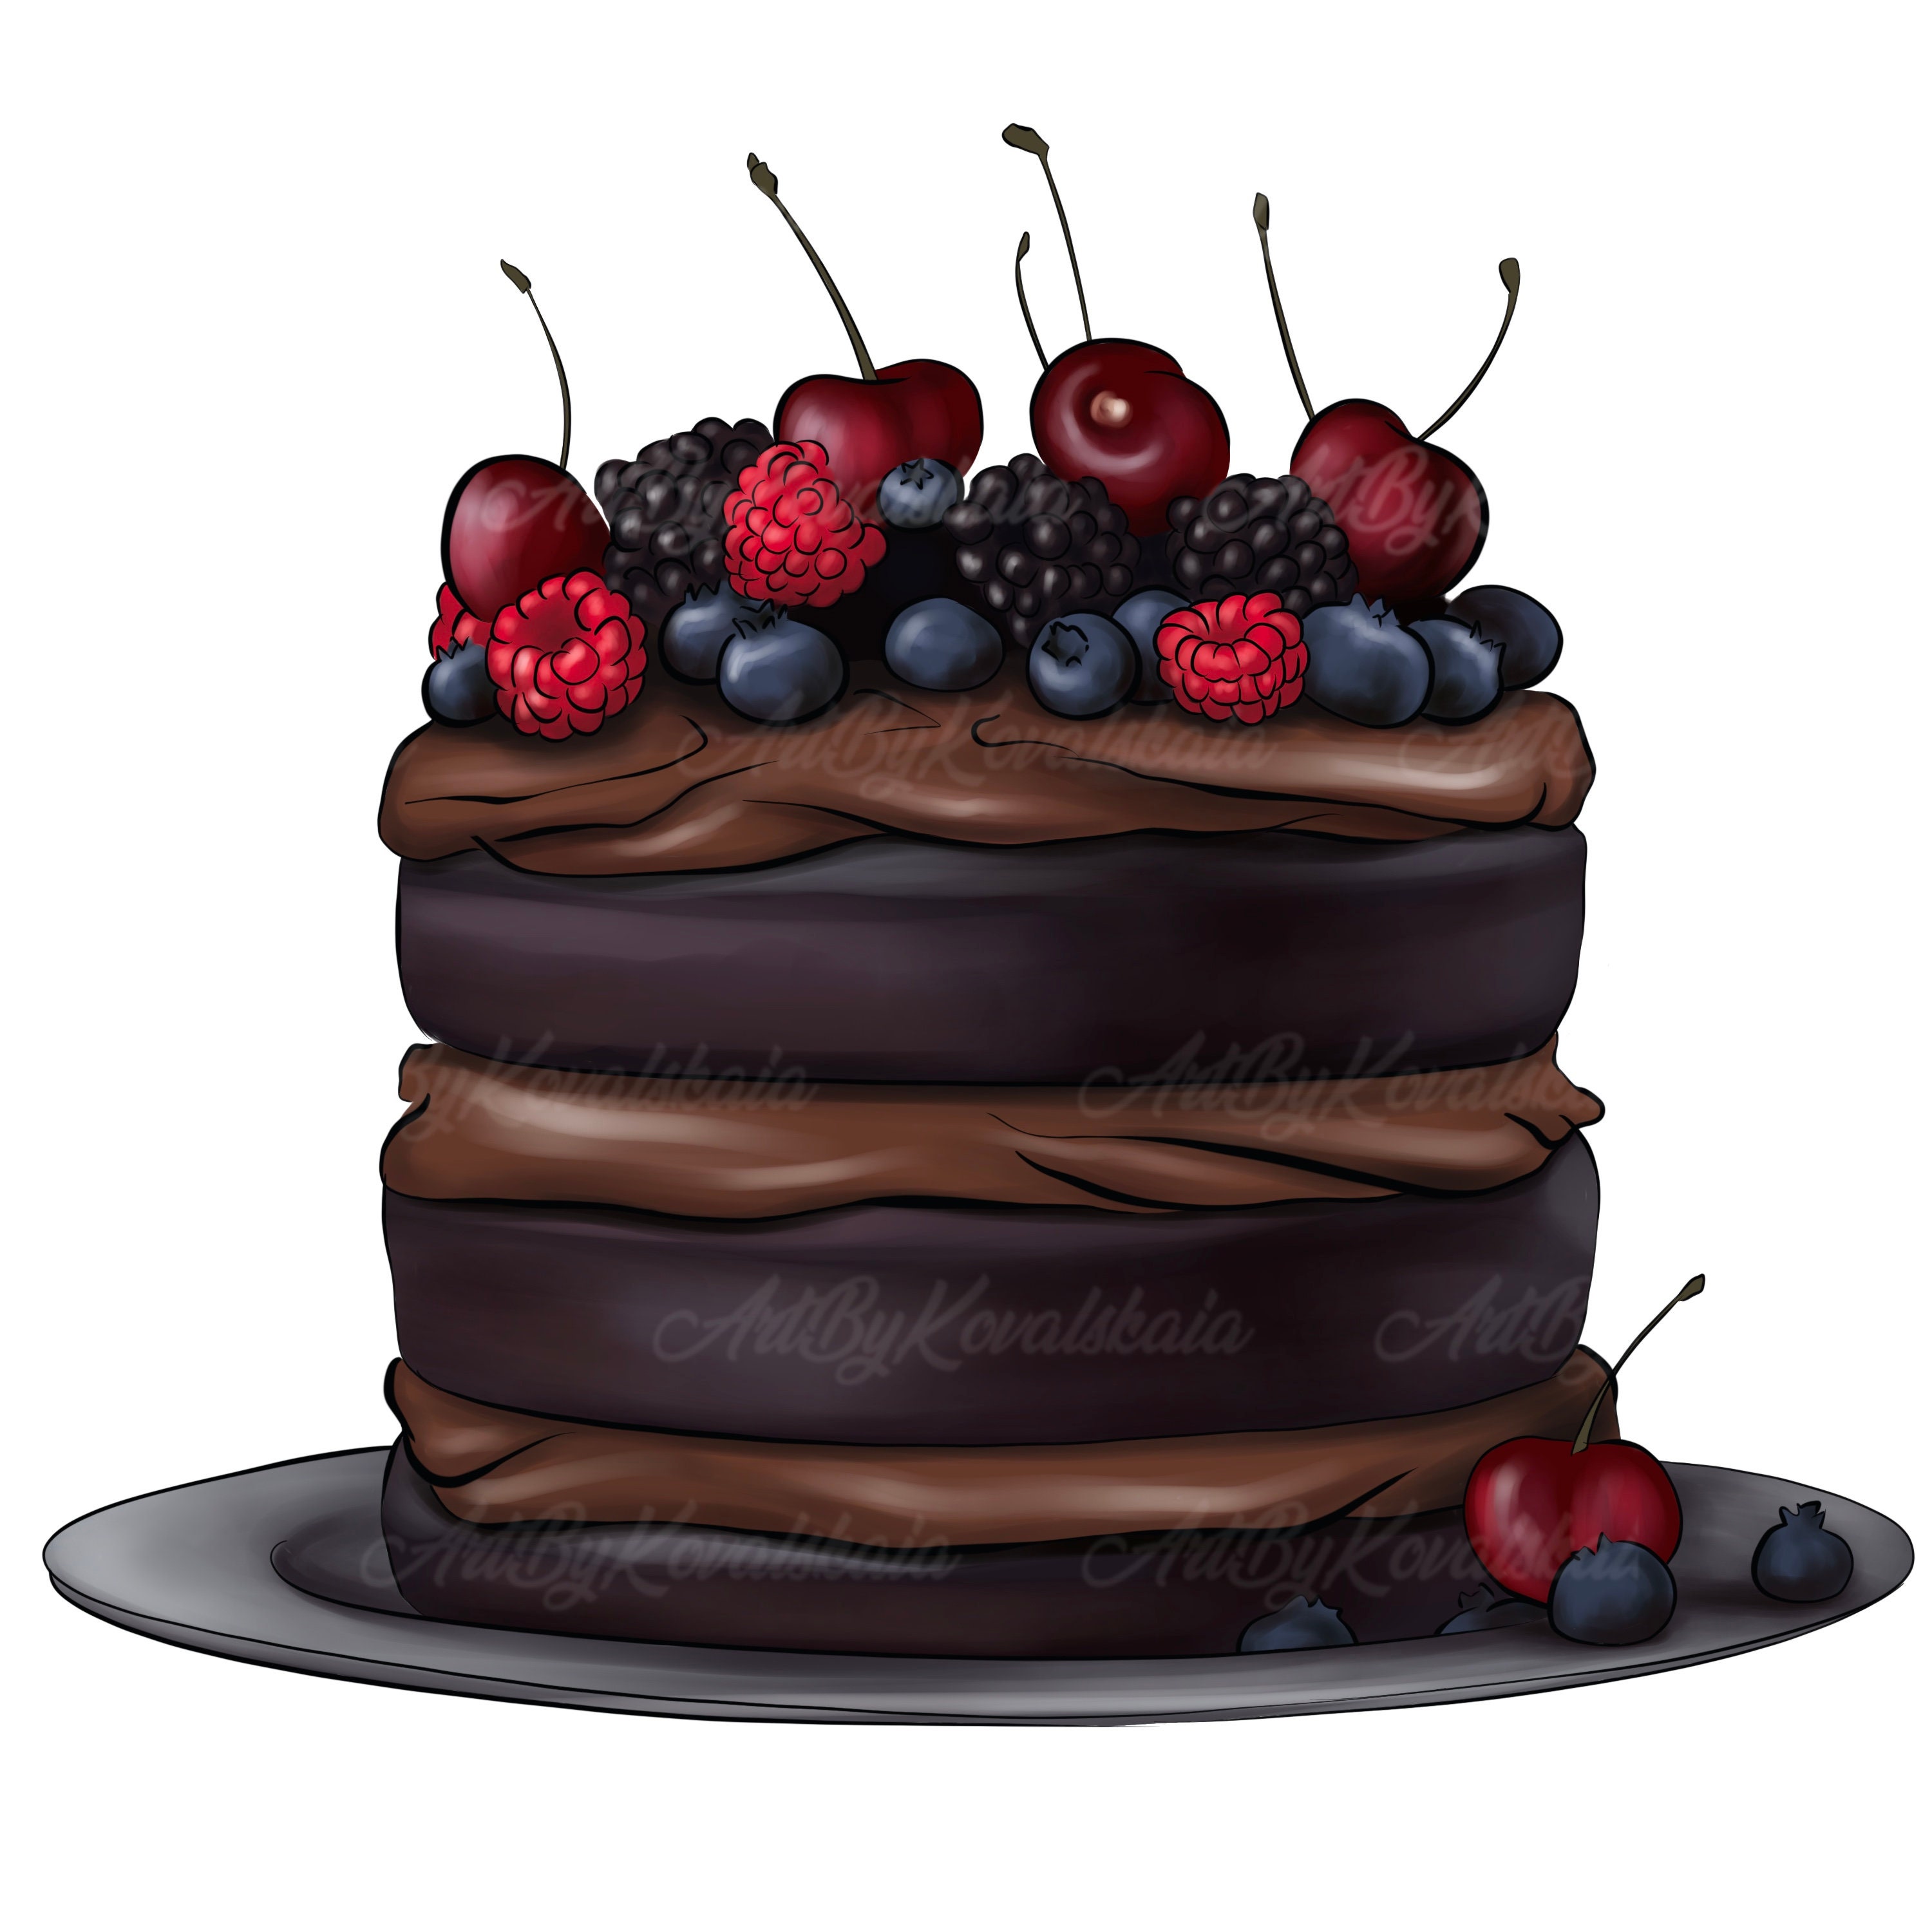 Birthday Cake PNG Clip Art Image​ | Gallery Yopriceville - High-Quality  Free Images and Transparent PNG Clipart